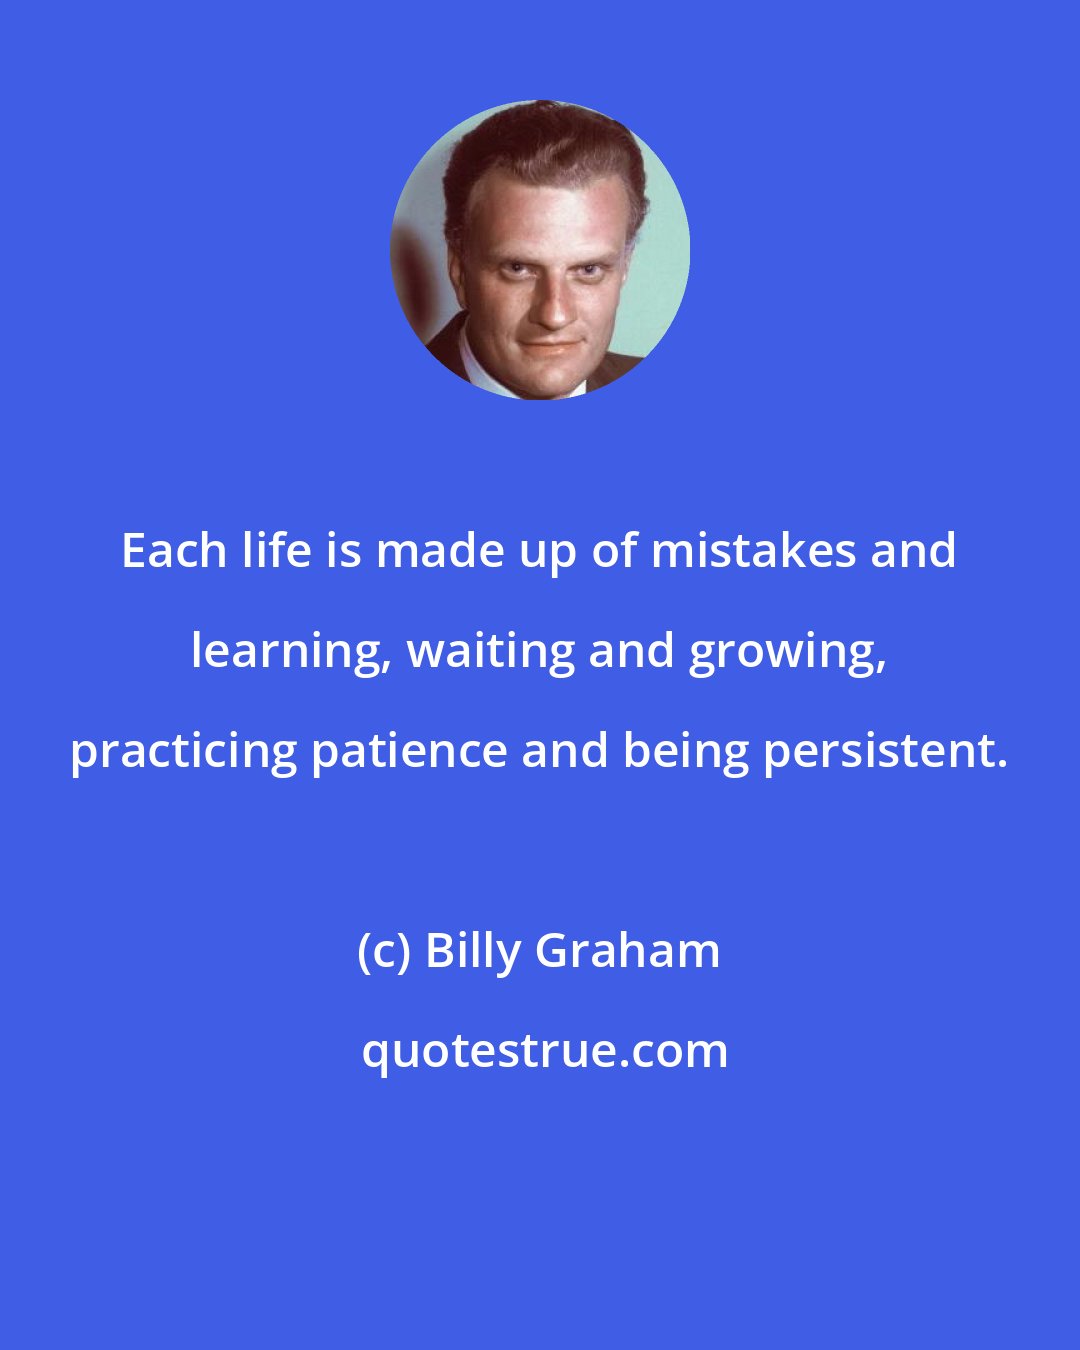 Billy Graham: Each life is made up of mistakes and learning, waiting and growing, practicing patience and being persistent.